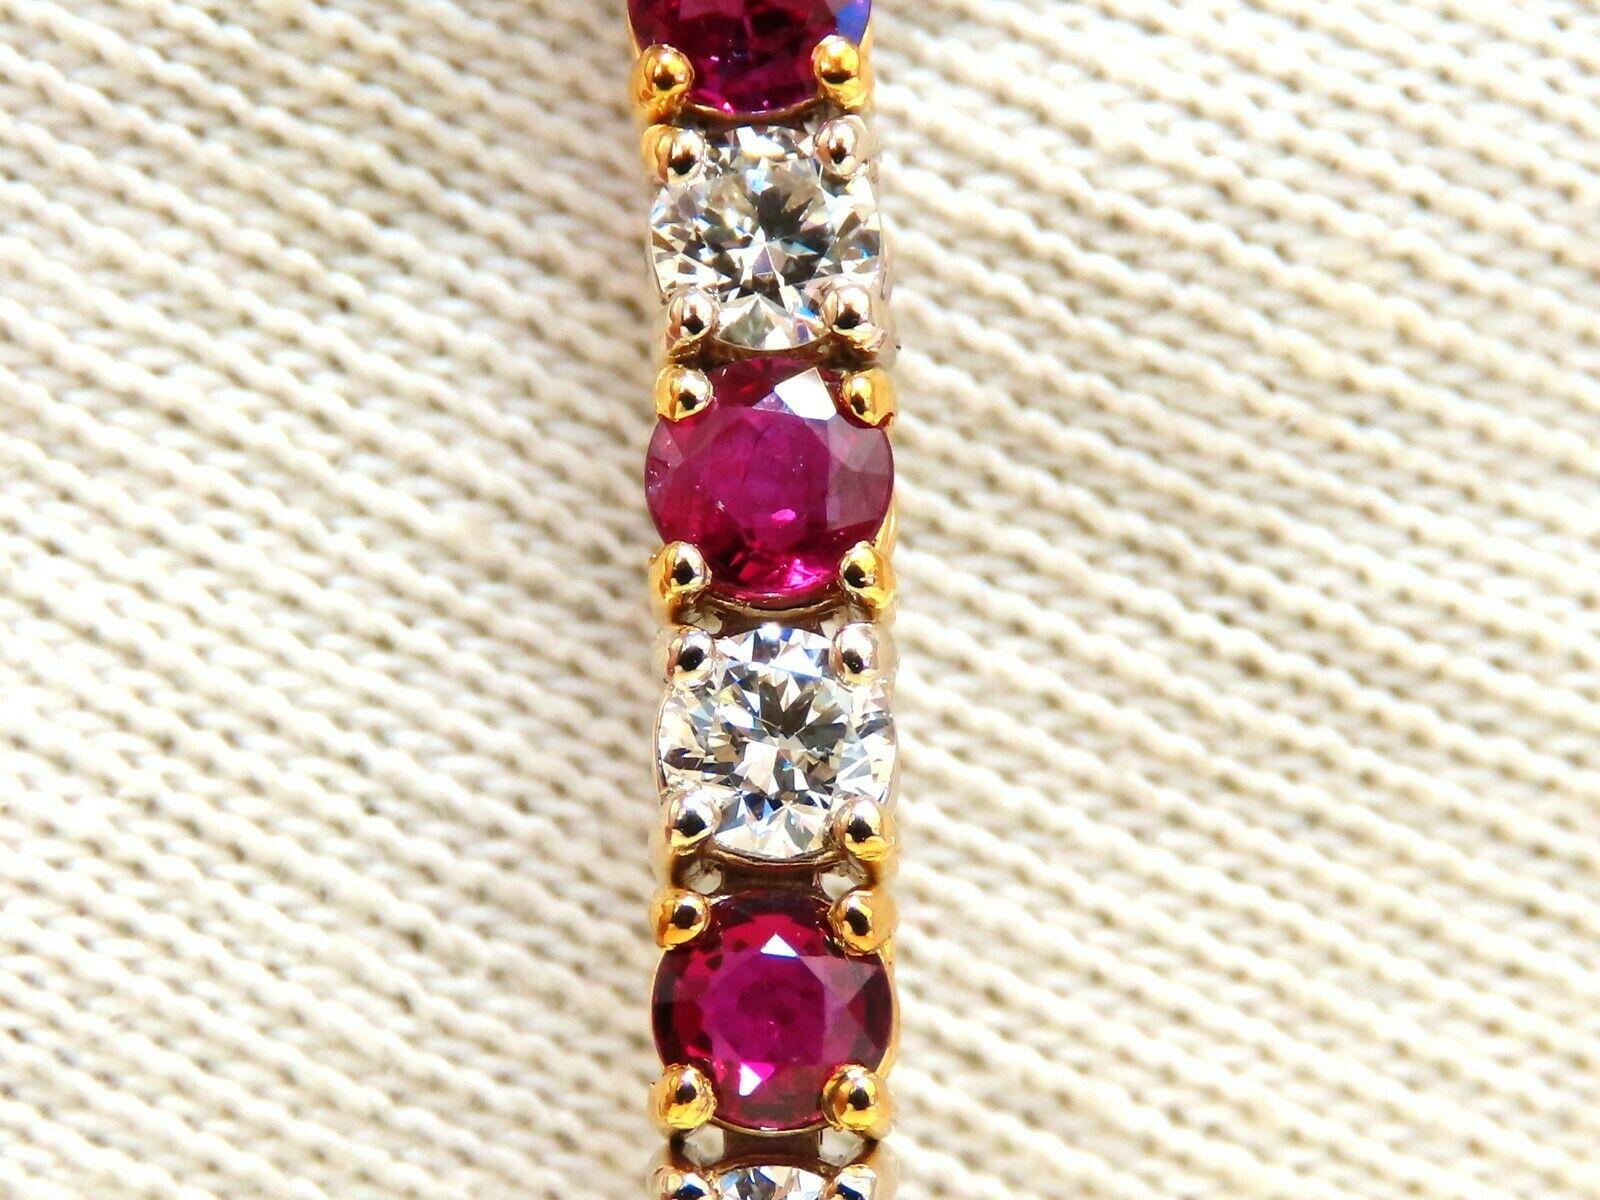 Ruby & Classic Alternating Tennis.

5.70ct. Natural ruby bracelet.

Rounds, full cuts 

Clean clarity

Transparent & Vivid Reds.

Average 4mm each

4.12ct Natural Diamonds

Rounds & full cuts

Vs-s clarity G-color

14kt. yellow & white Gold

13.5